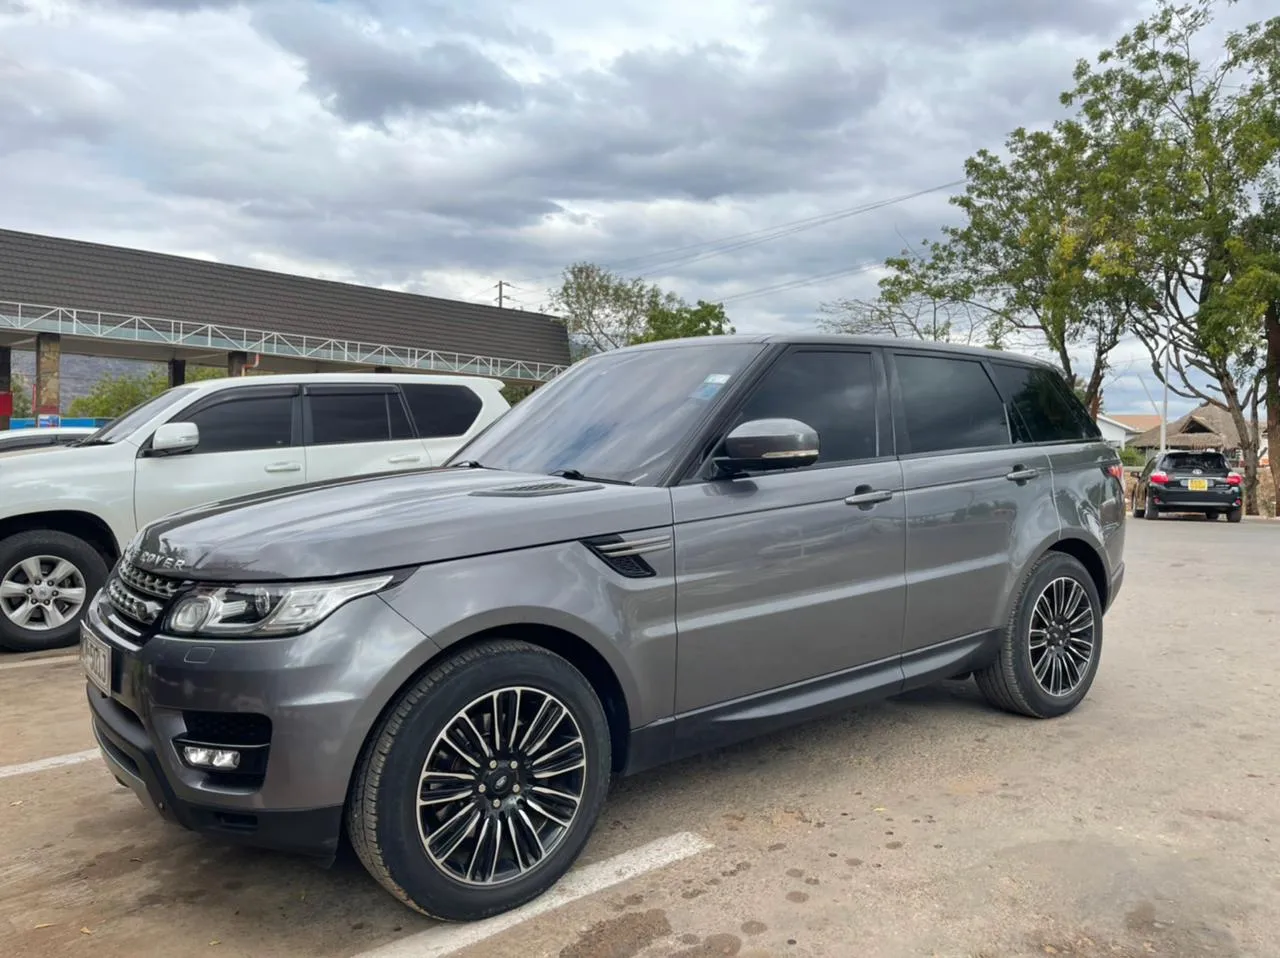 Cars Cars For Sale/Vehicles SUV-Range Rover Sport 2015 Petrol 3L super Charge New Cheapest Deal 13